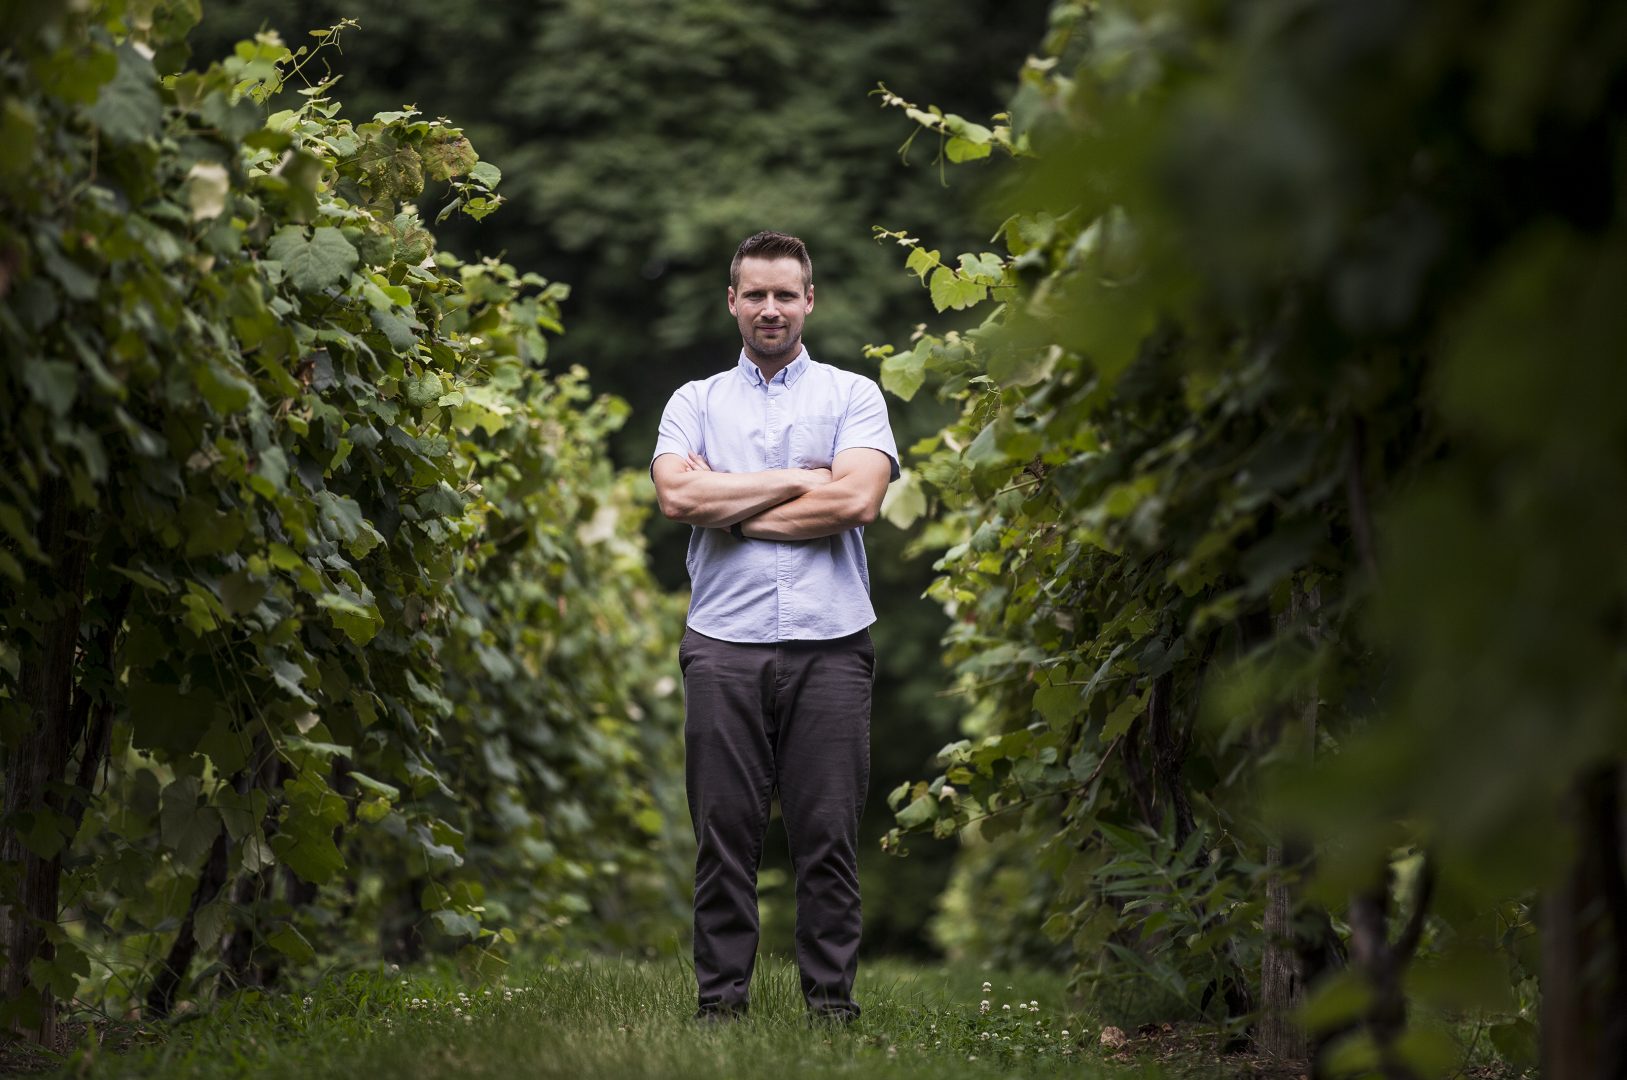 Jonas Nissley of Nissley Vineyards. July 16, 2020 Sean Simmers | ssimmers@pennlive.com